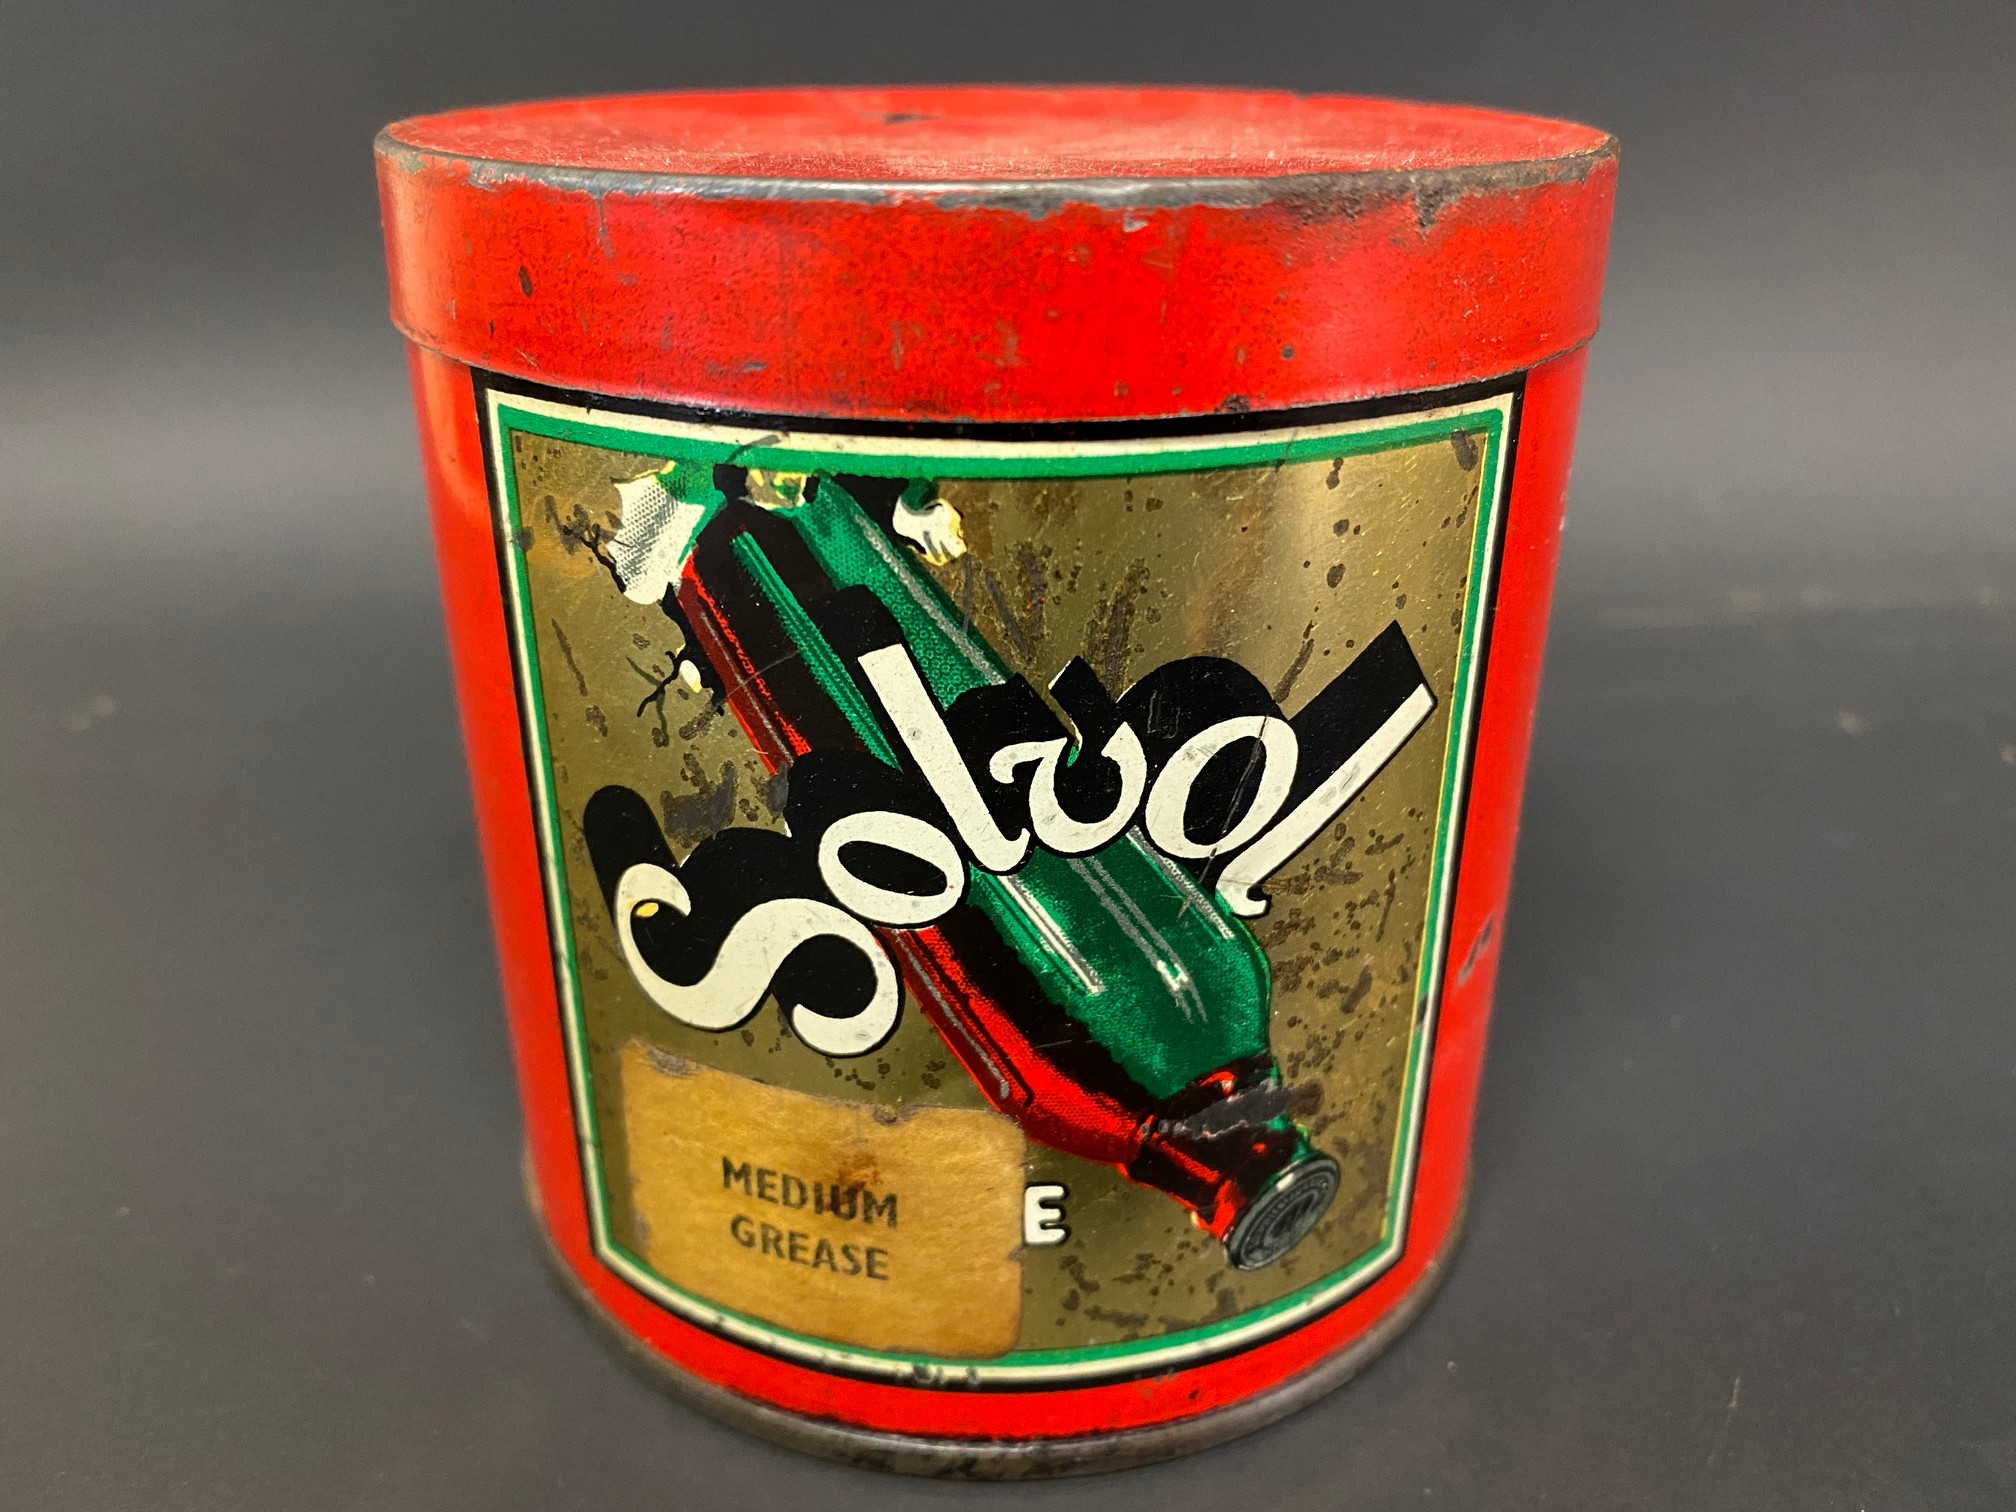 A Solvol grease tin in good condition.